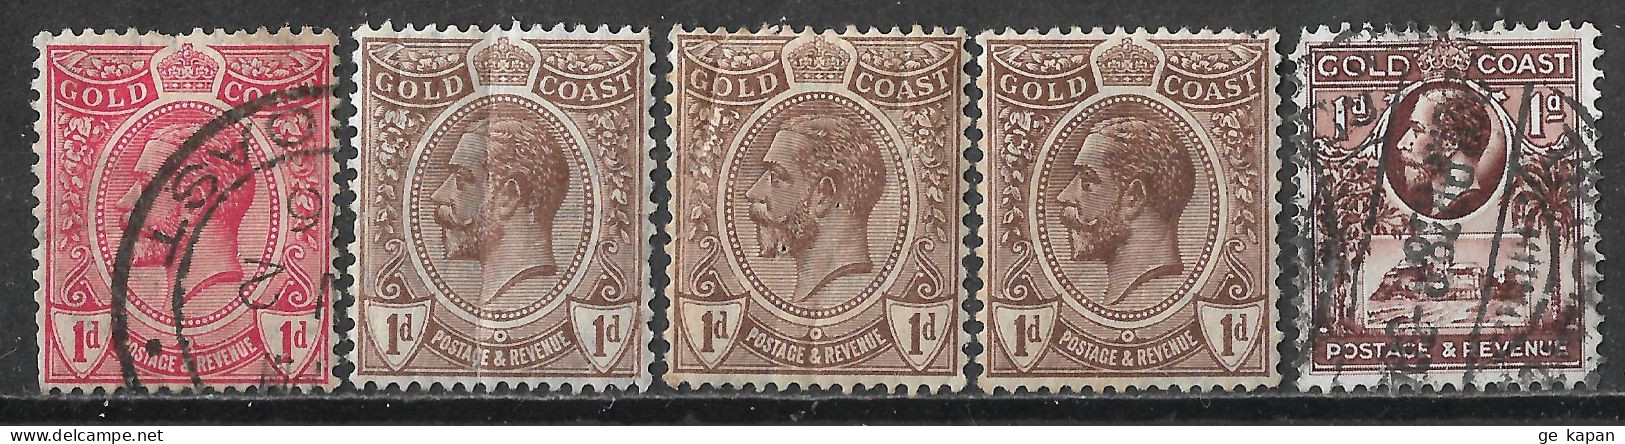 1913-1928 GOLD COAST SET OF 2 USED + 3 MNH STAMPS (Michel # 63a.76.89) CV €2.90 - Goudkust (...-1957)